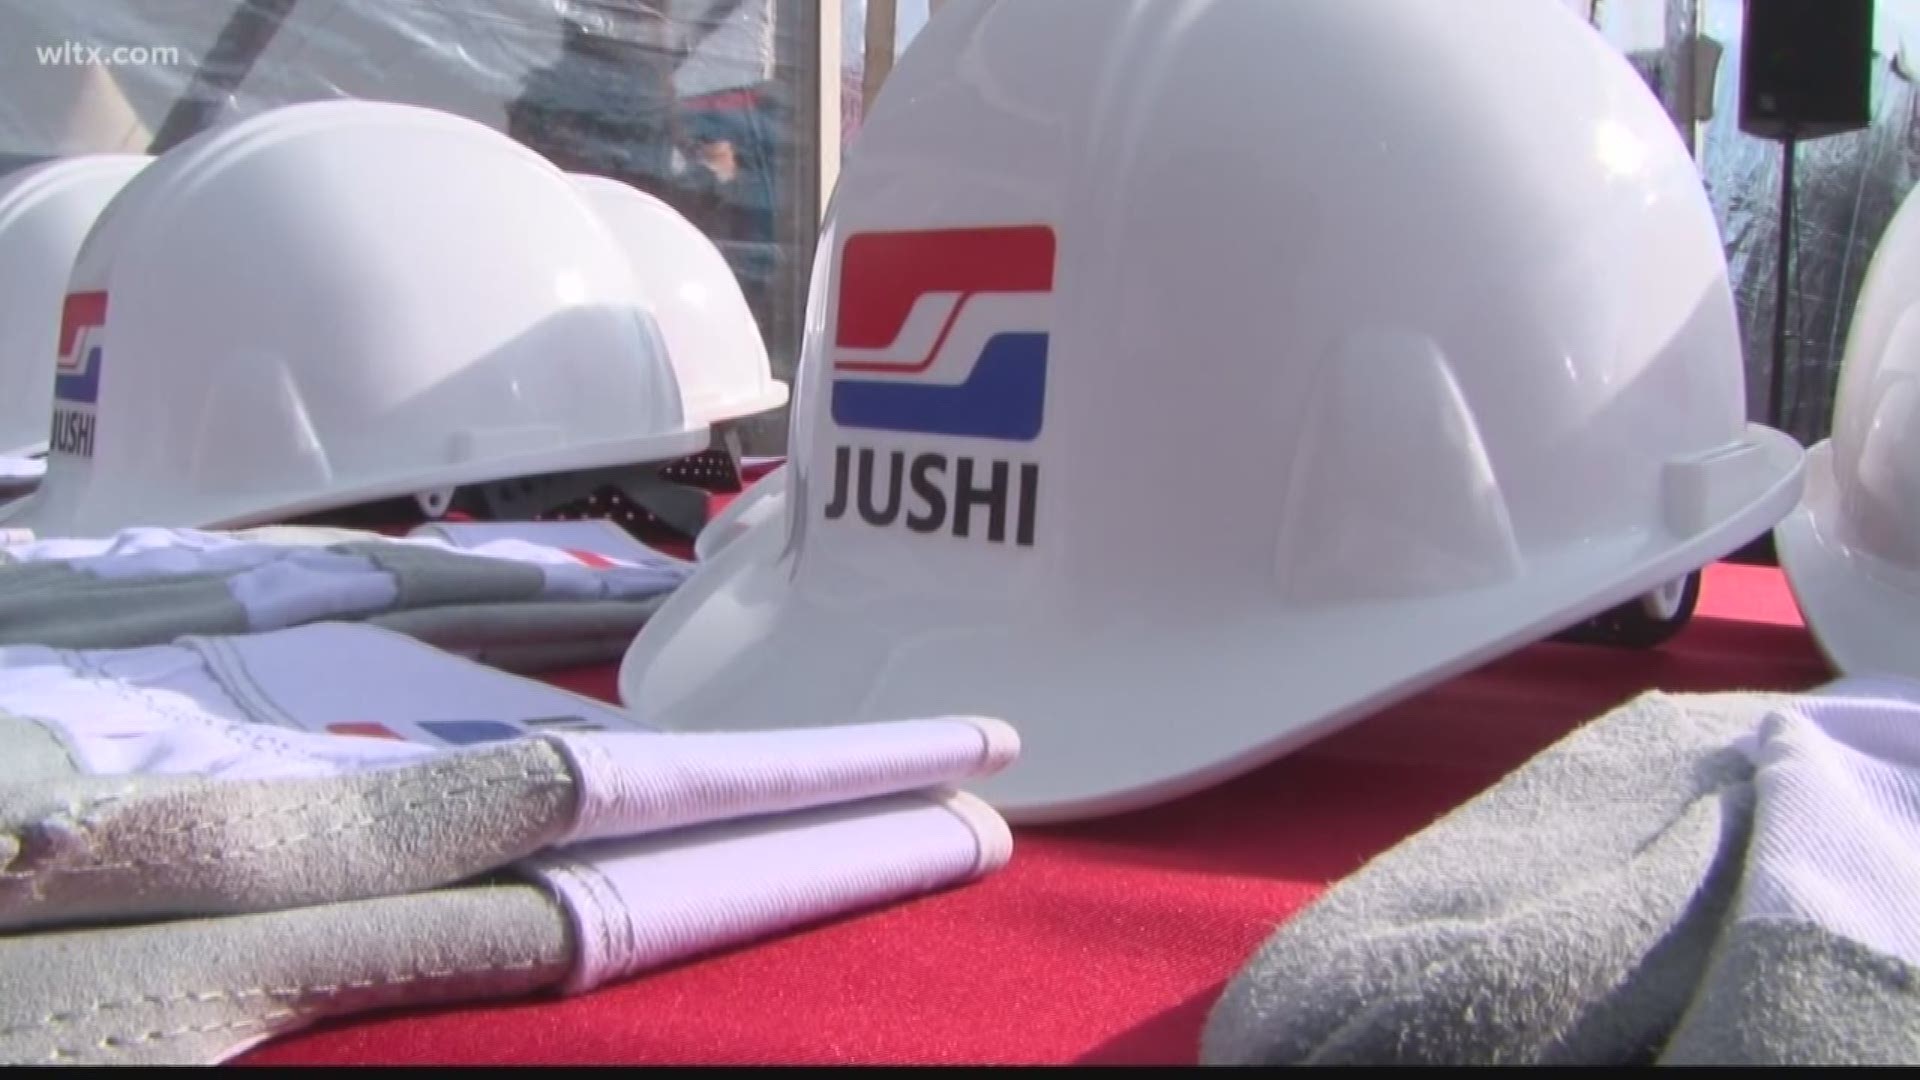 Jushi is ready to hire 400 production personnel - immediately - for an 80,000-ton production line in Richland County. Workers are expected to make $15-20 an hour.